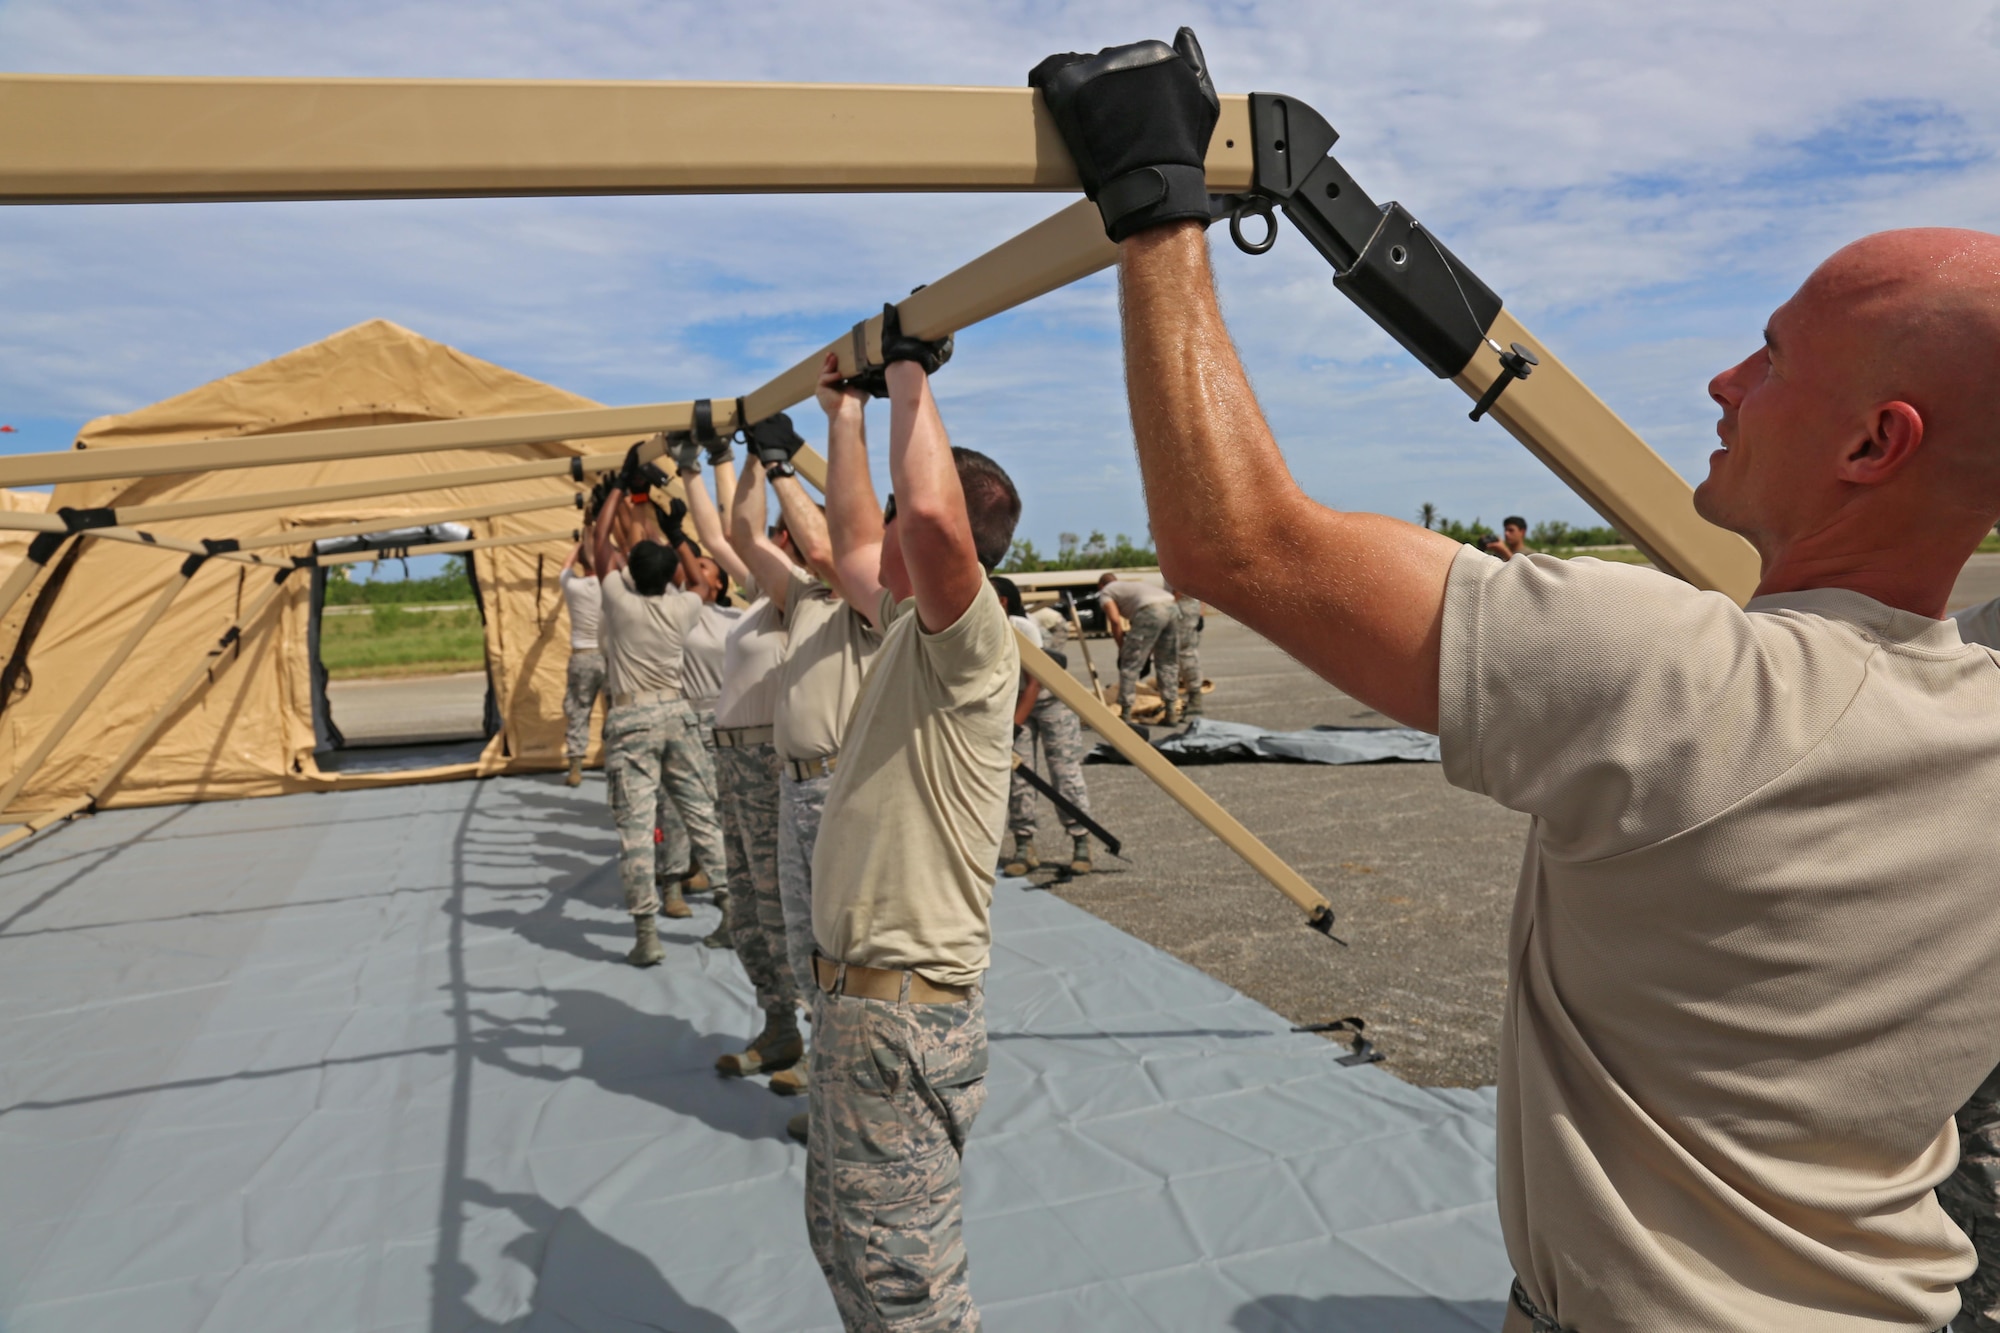 U.S. Airmen assigned to 633rd Medical Group, assemble medical tents, Aguadilla, Puerto Rico, Oct. 16, 2017. The 633rd Medical Group is conducting medical evacuation and relief efforts to support FEMA in the recovery process of Puerto Rico after the devastation created by Hurricane Maria. (U.S. Army photo by Sgt. Nelson Rodriguez)